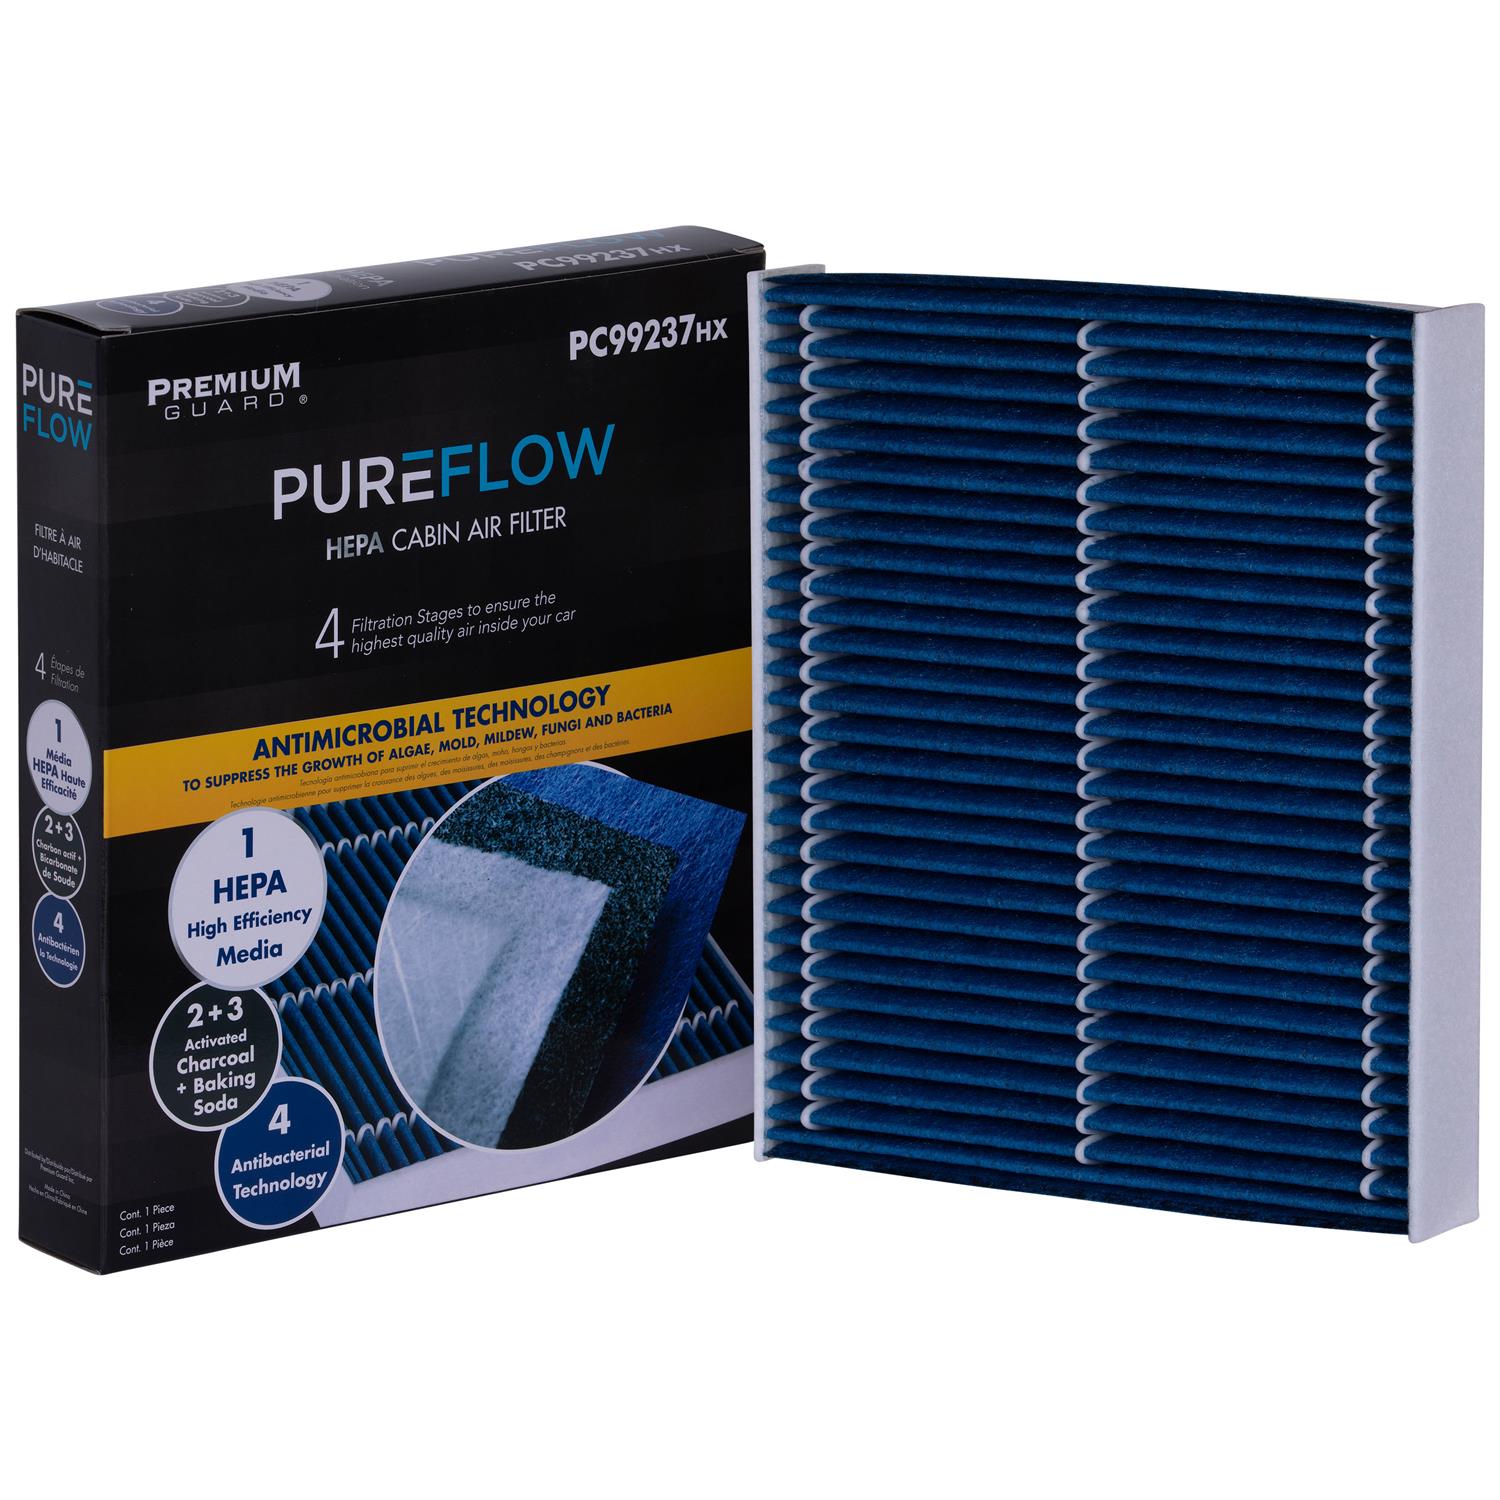 PUREFLOW 2022 Lexus RX350L Cabin Air Filter with HEPA and Antibacterial Technology, PC99237HX